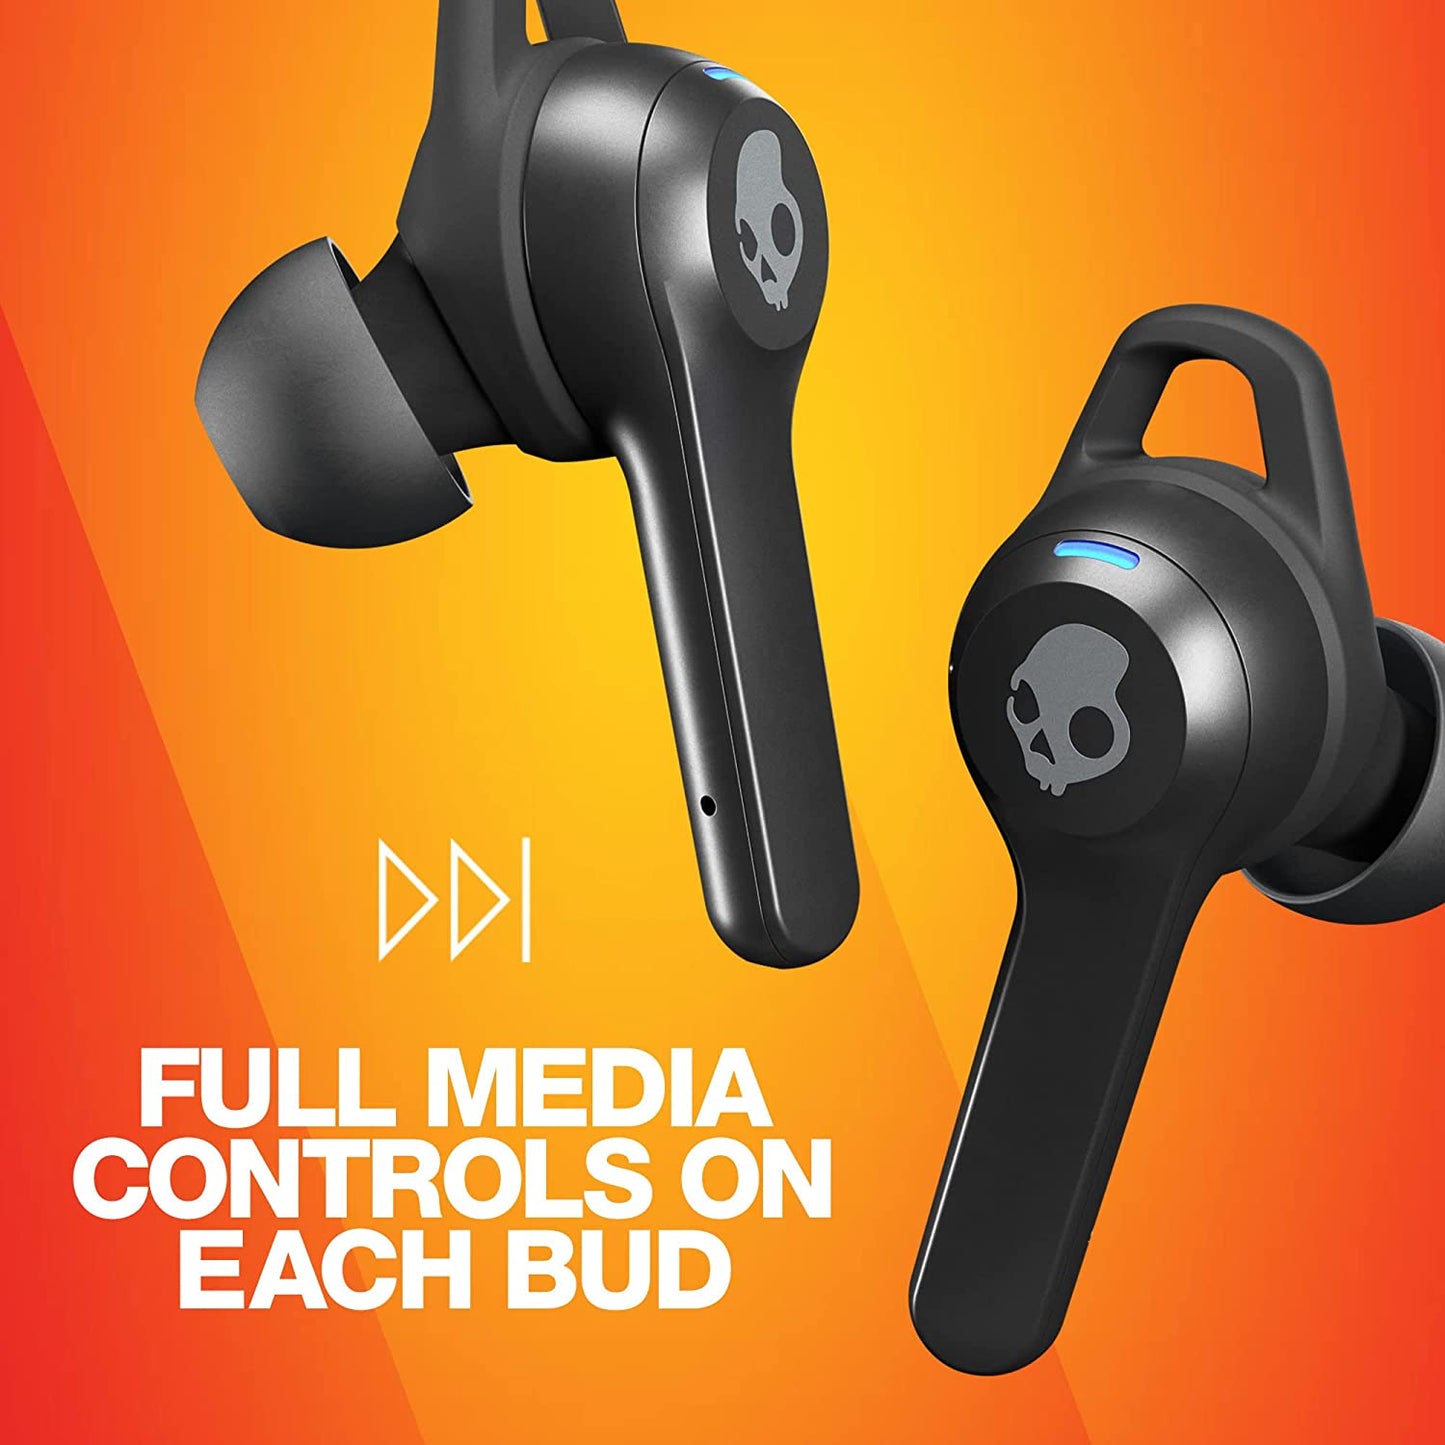 Skullcandy Indy™ Fuel True Wireless Earbuds with Wireless Charging Case 6h Playtime IP55 Water-Resistant (True Black)